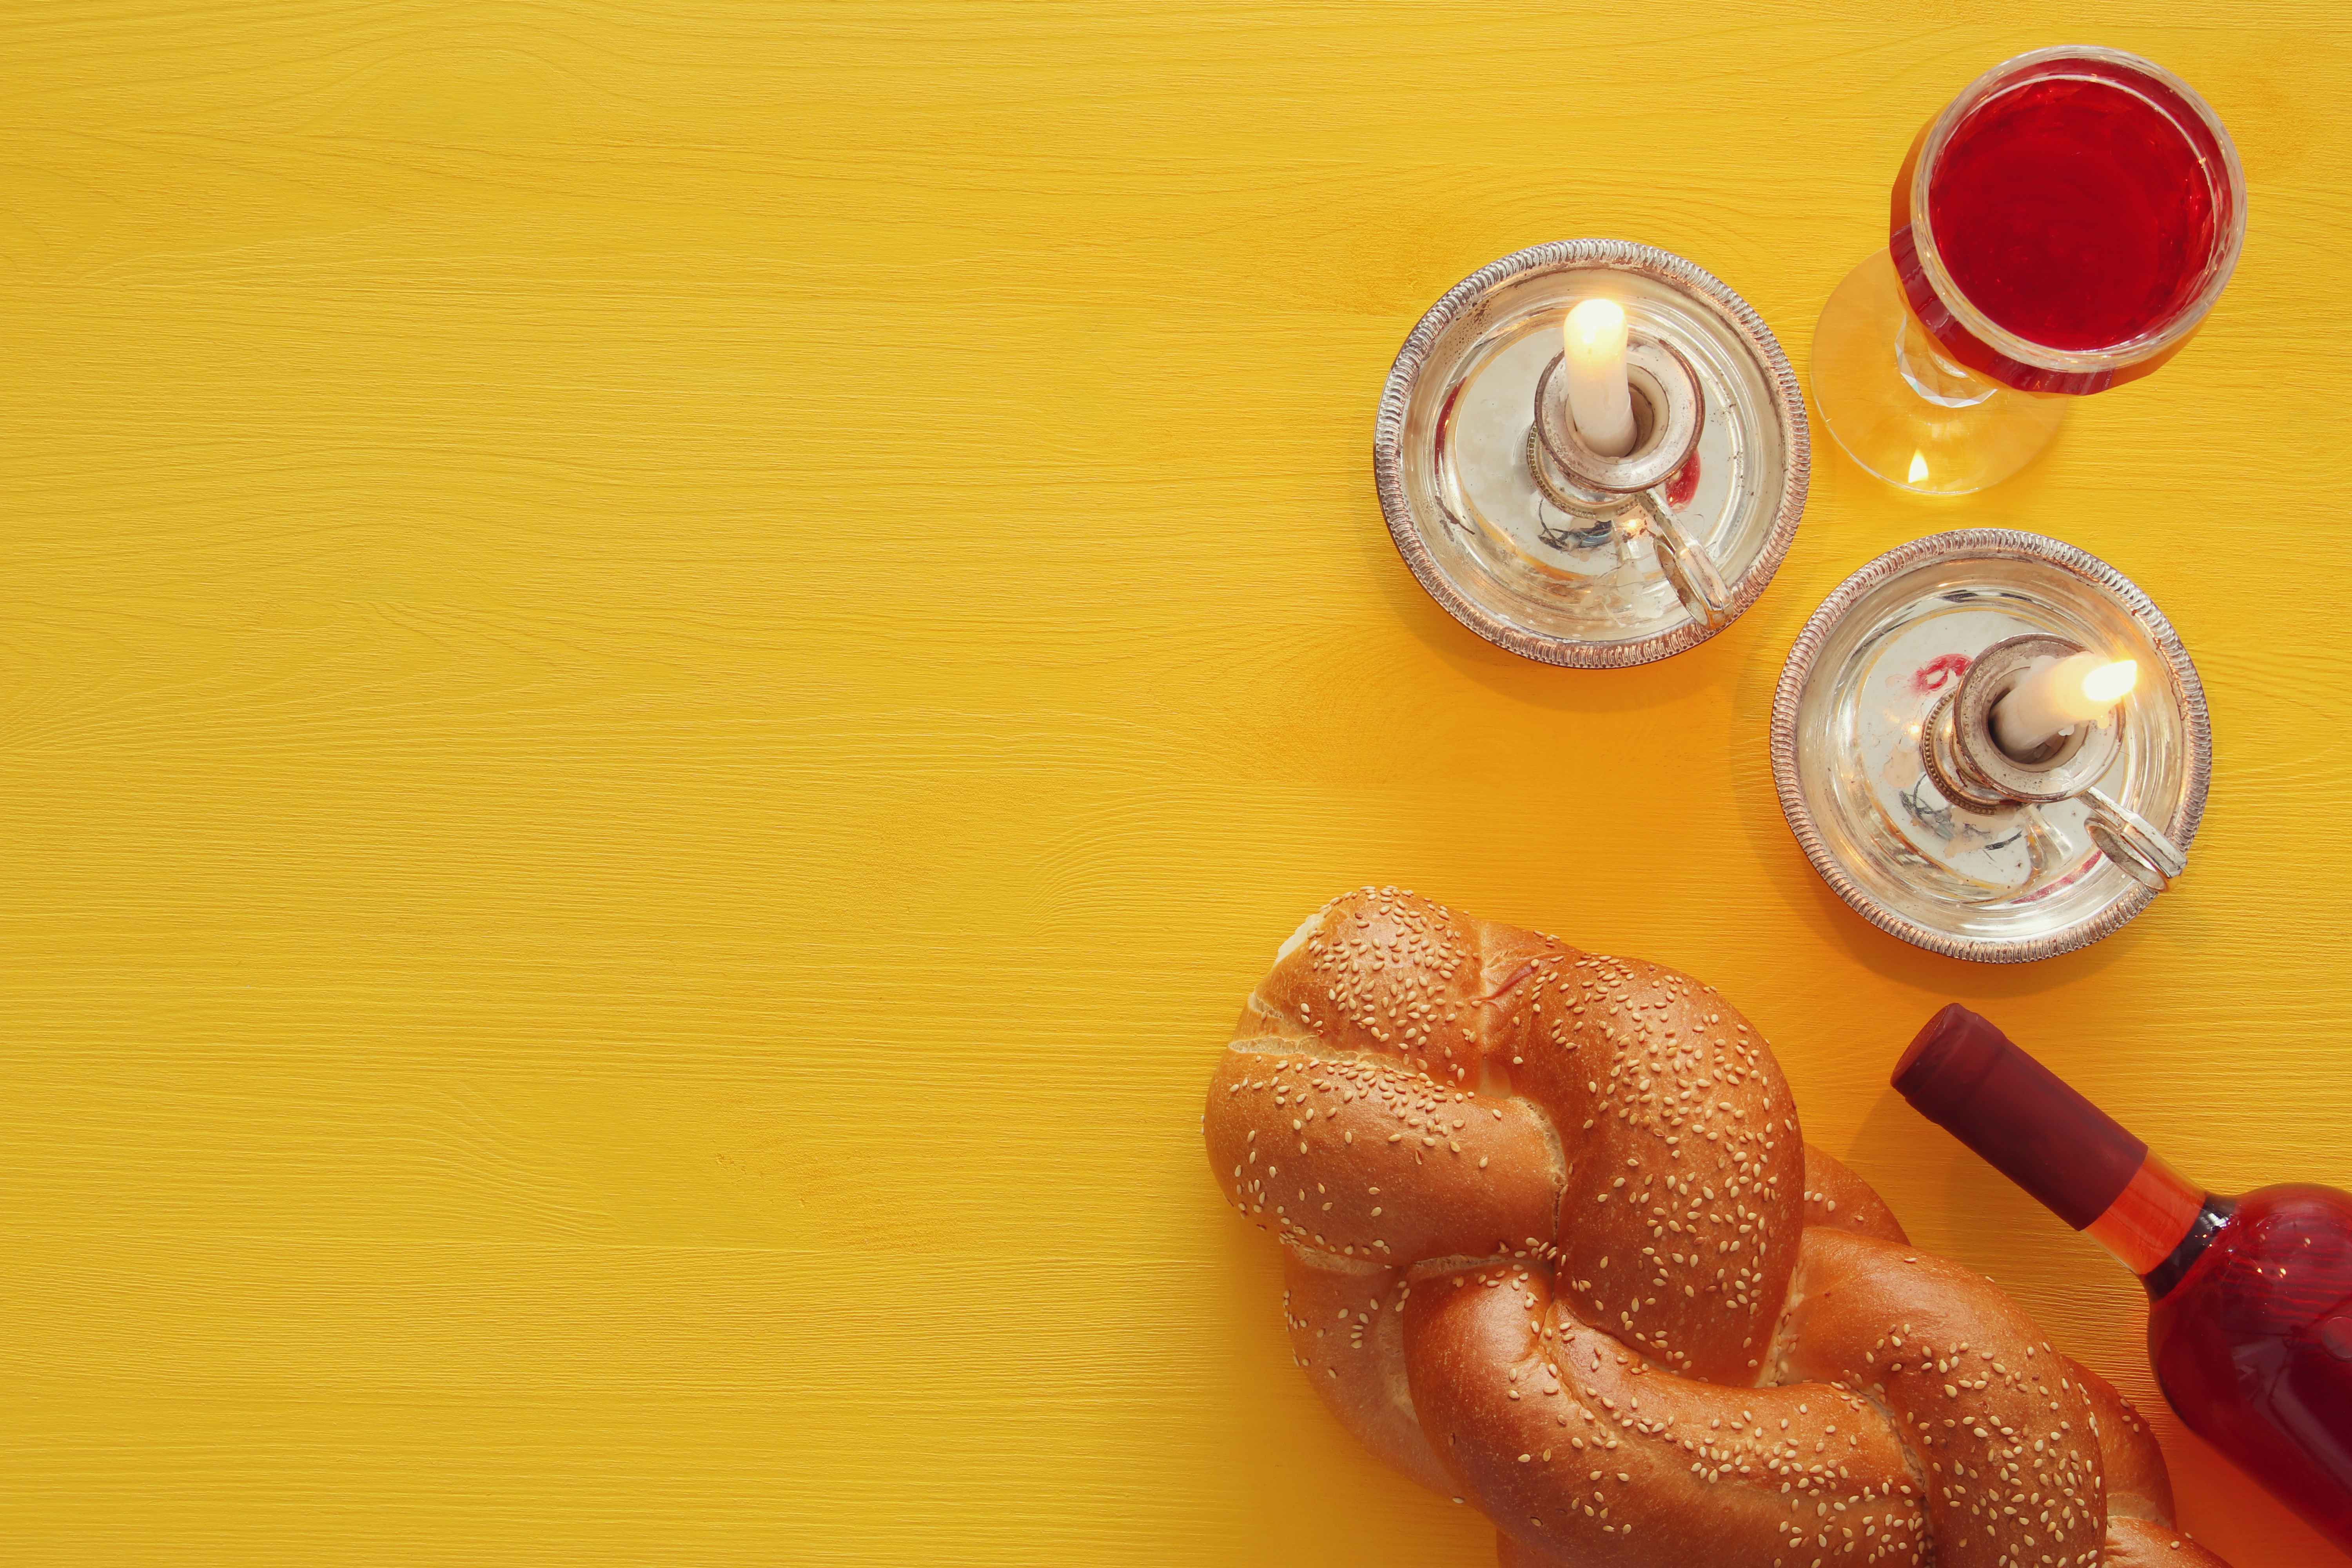 shabbat image. challah bread, wine and candles. Top view.